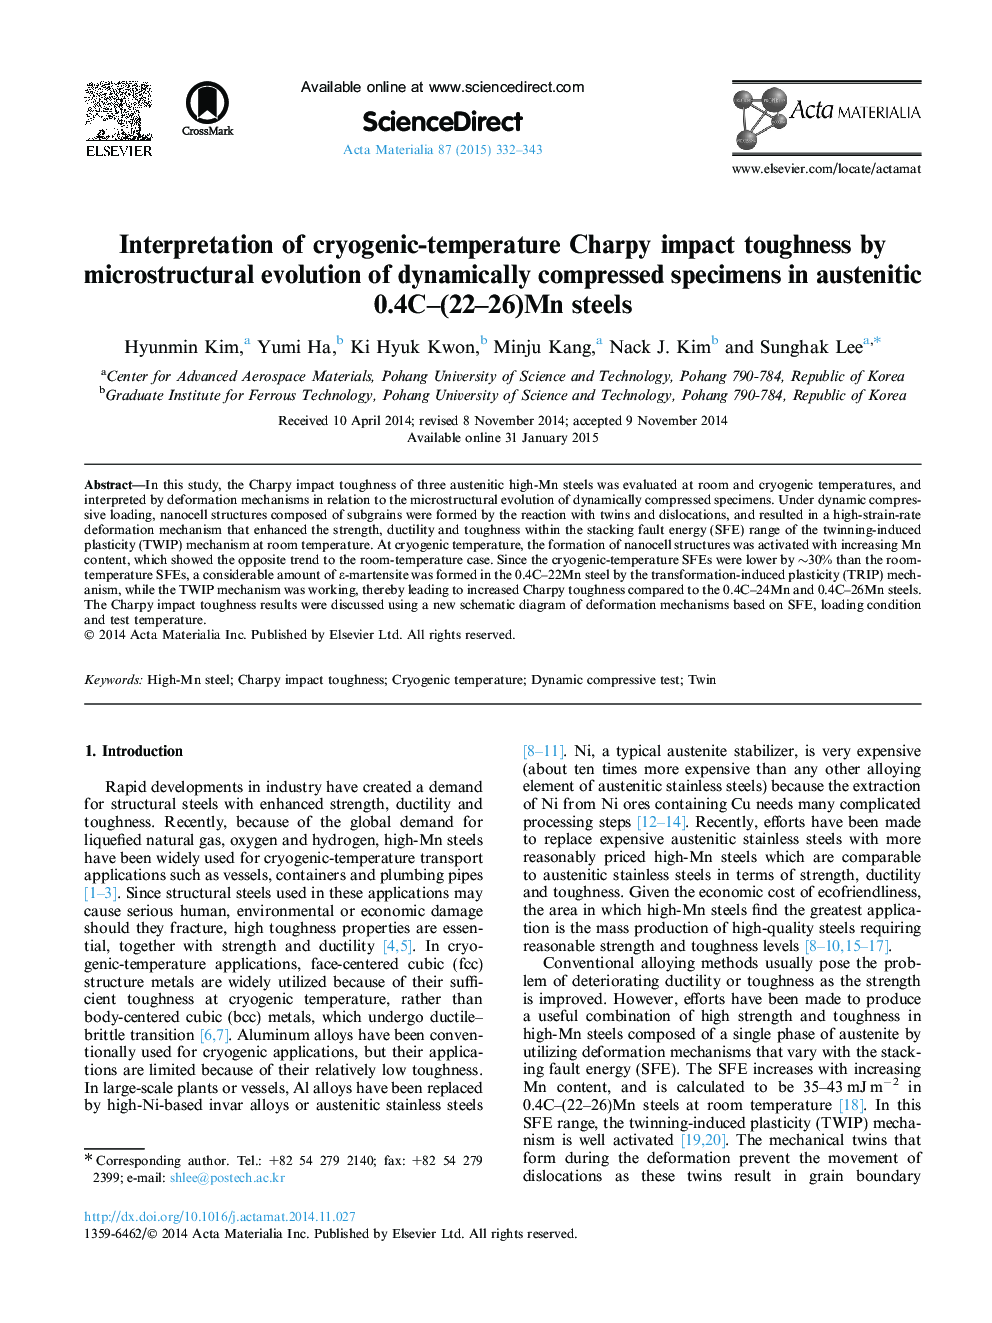 Interpretation of cryogenic-temperature Charpy impact toughness by microstructural evolution of dynamically compressed specimens in austenitic 0.4C-(22-26)Mn steels